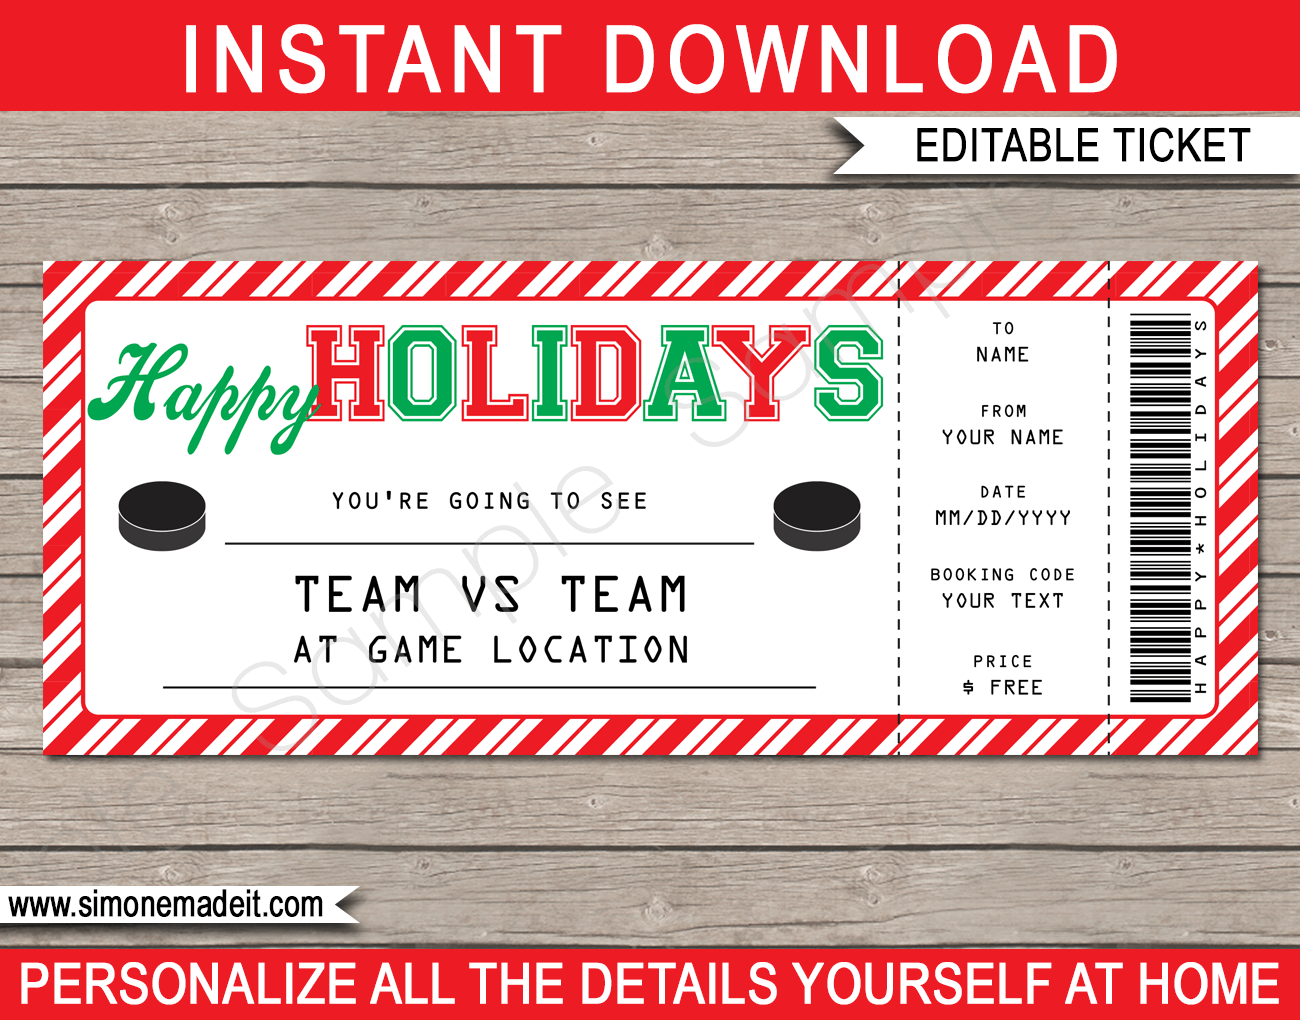 NHL Holiday Gift Cards & Online Gift Certificates